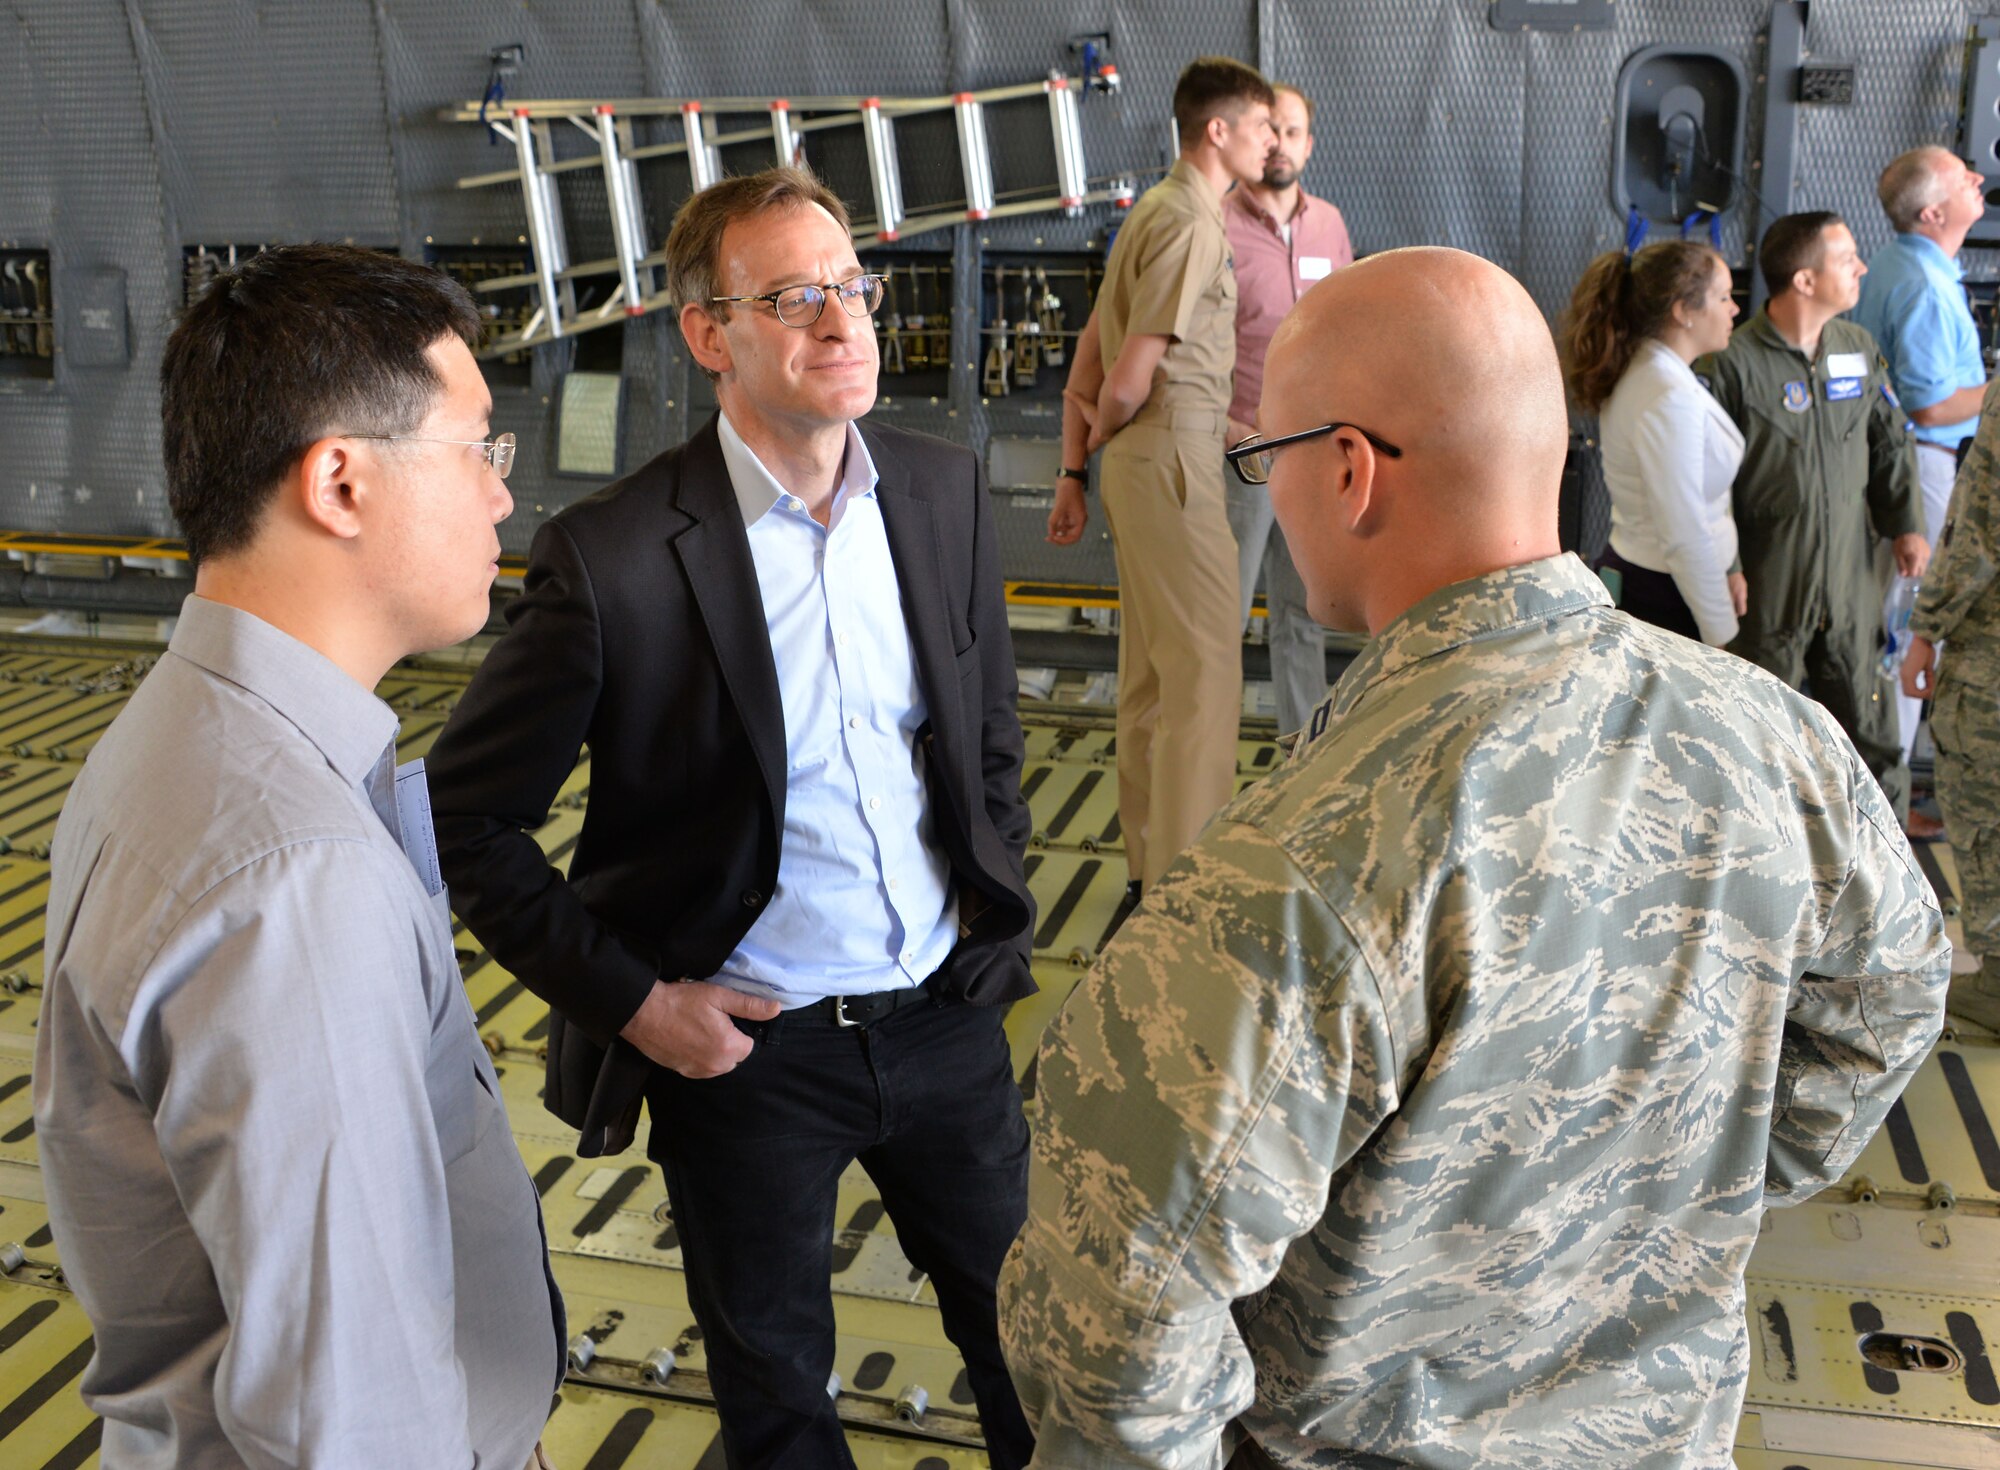 Capt. Garrett Custons (right), 60th Comptroller Squadron, talks with industry professionals during a tour of a C-5M Super Galaxy as part of a Phoenix Collider event at Travis Air Force Base, Calif., Aug. 1, 2017. Government and industry collaborations like Phoenix Collider are one of several avenues Phoenix Spark is pursuing to expand its footprint and develop solutions to enhance the lethality and efficiency of today’s warfighter. (U.S. Air Force photo/Staff Sgt. Charles Rivezzo)